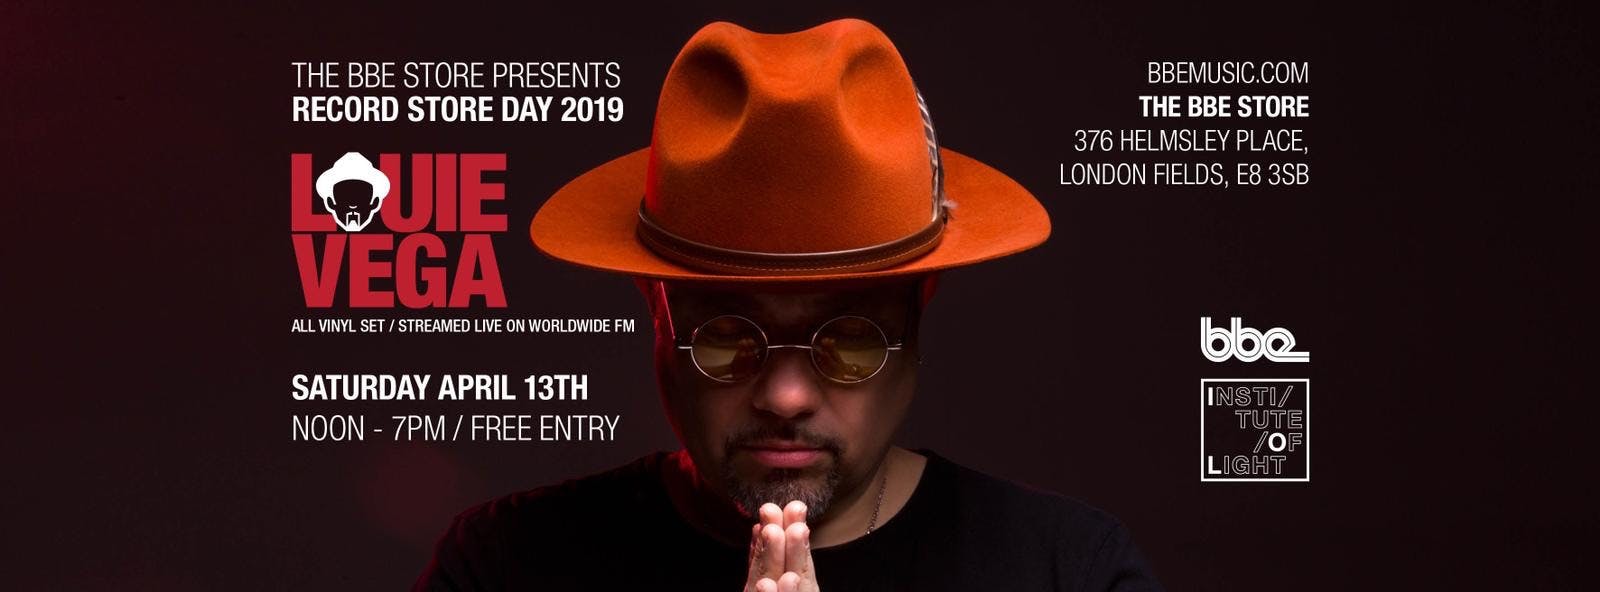 Louie Vega joins us on Record Store Day, April 13th, for an all vinyl set, streamed across the world on Worldwide FM, with Marc Mac and Johnny Reckless.